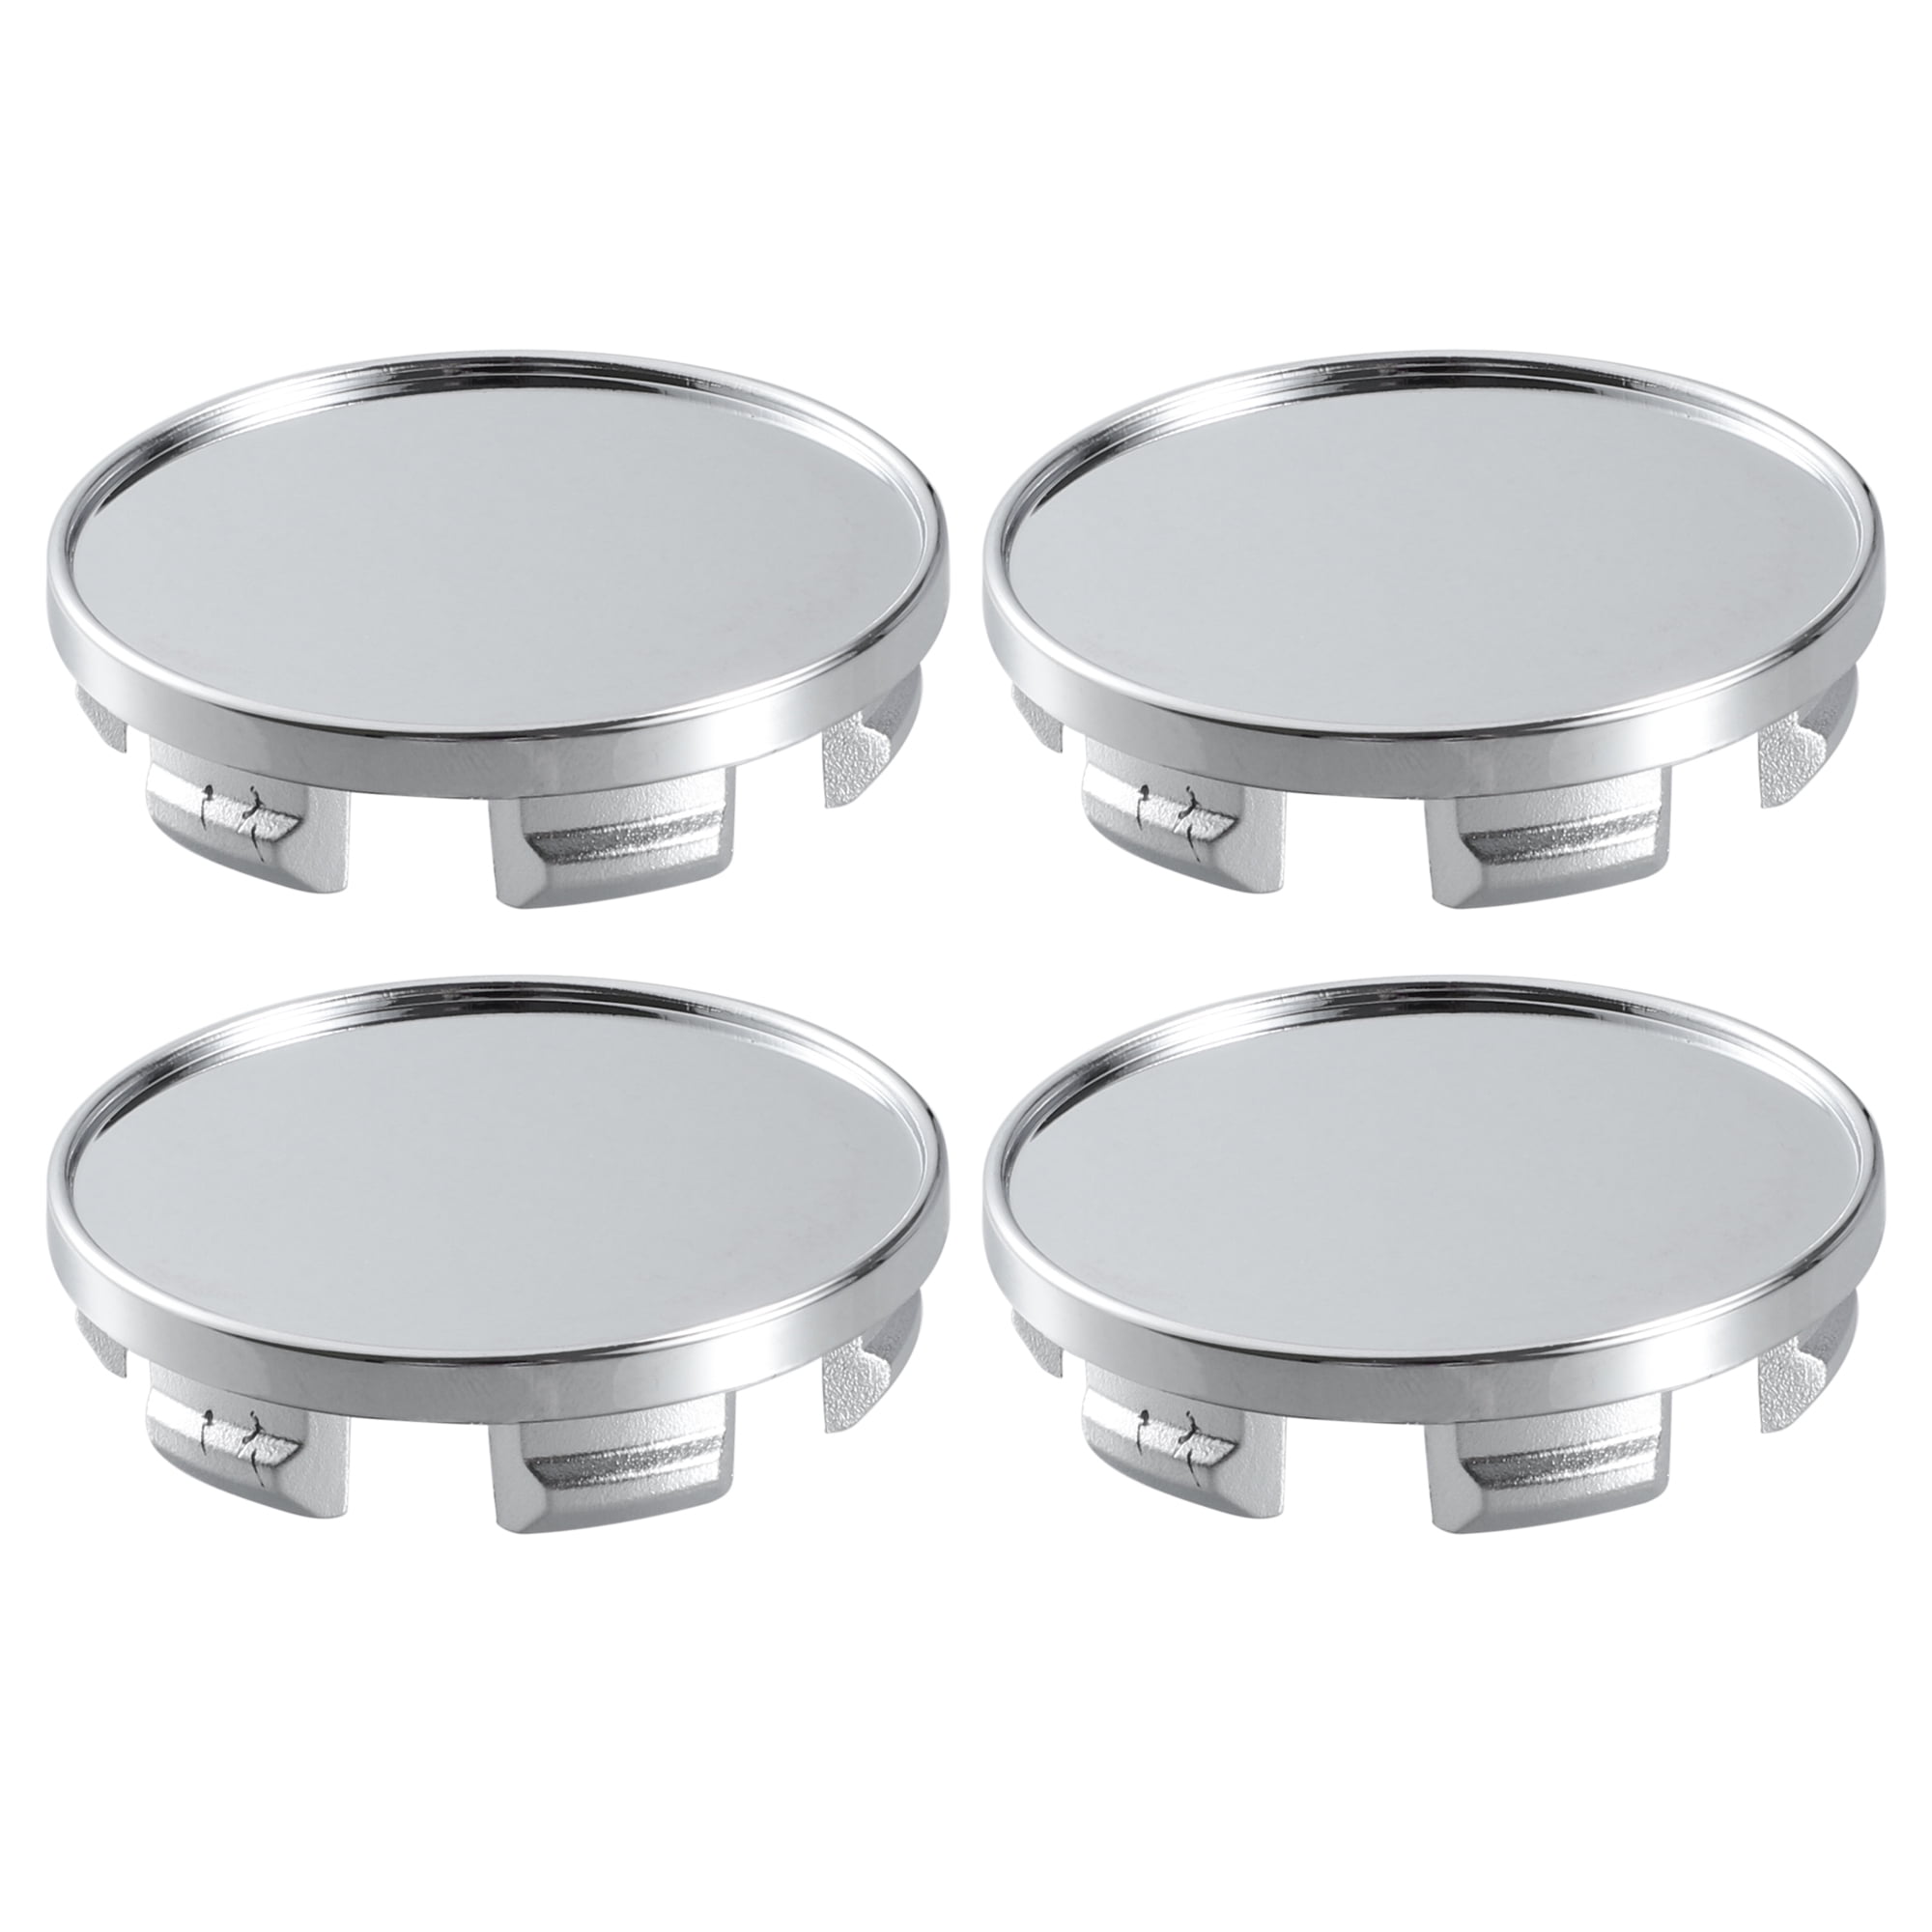 Universal Wheel Hub Cap 4 Pack 76mm/72mm Silver with Steel Ring for Cars 